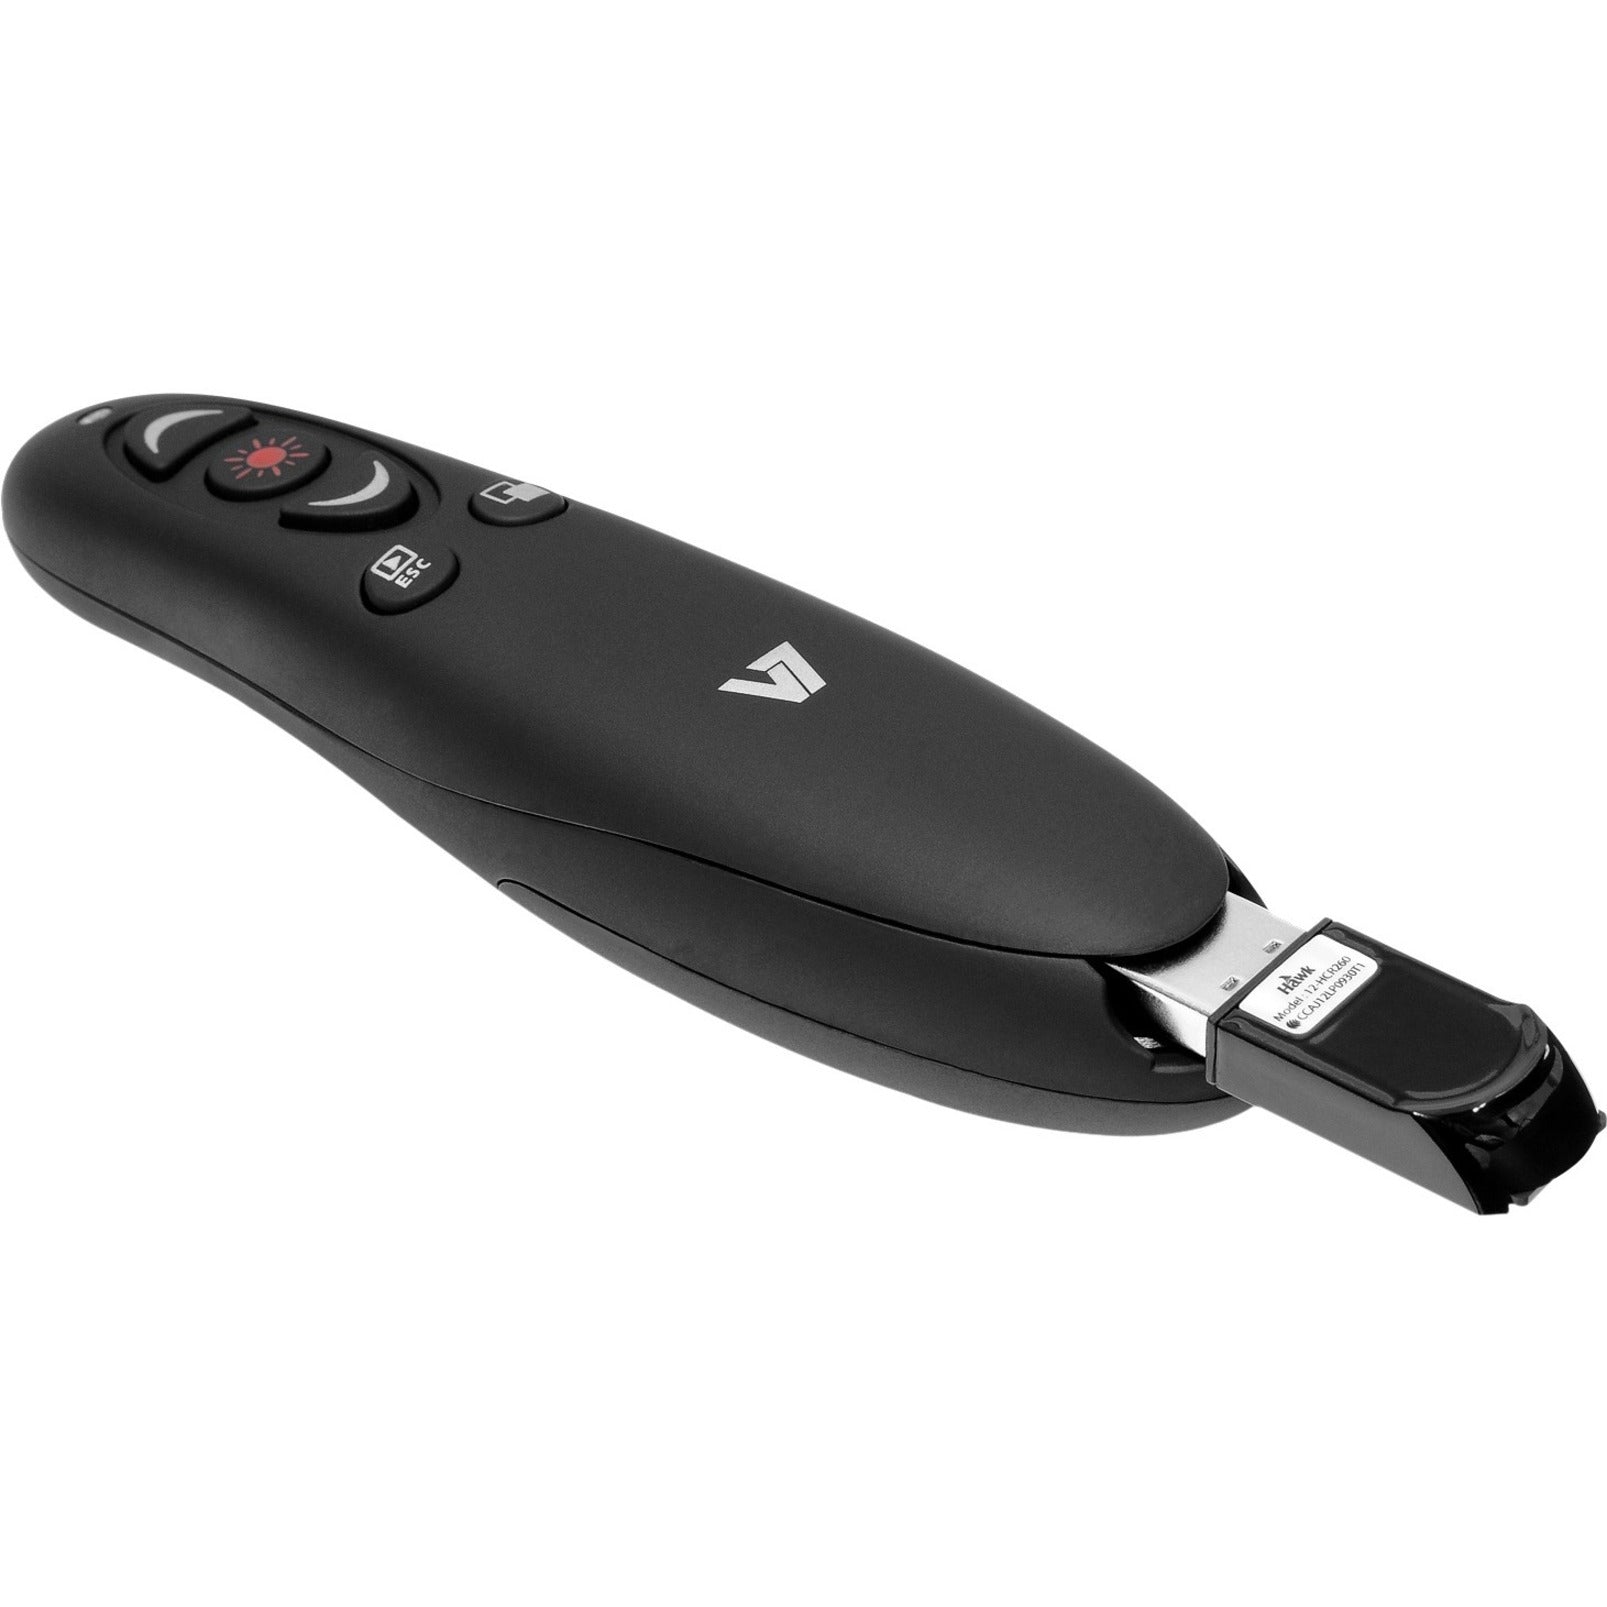 V7 WP1000-24G-19NB Professional Wireless Presenter with Laser Pointer and microSD Card Reader, 2-Year Warranty, Ergonomic Design